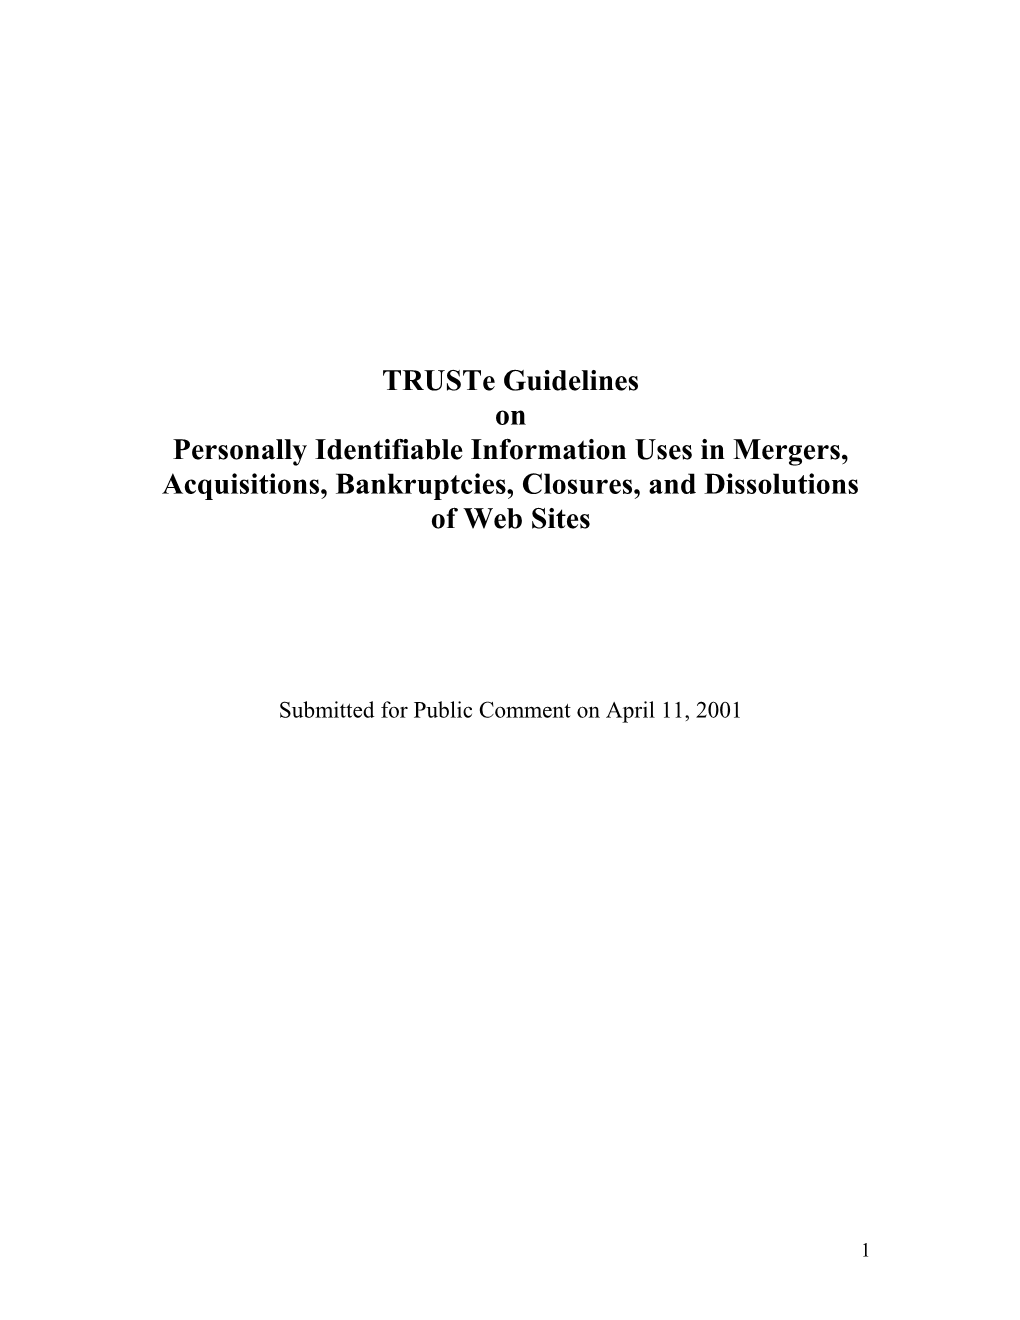 Truste's Revised Mergers, Acquisitions and Bankruptcies